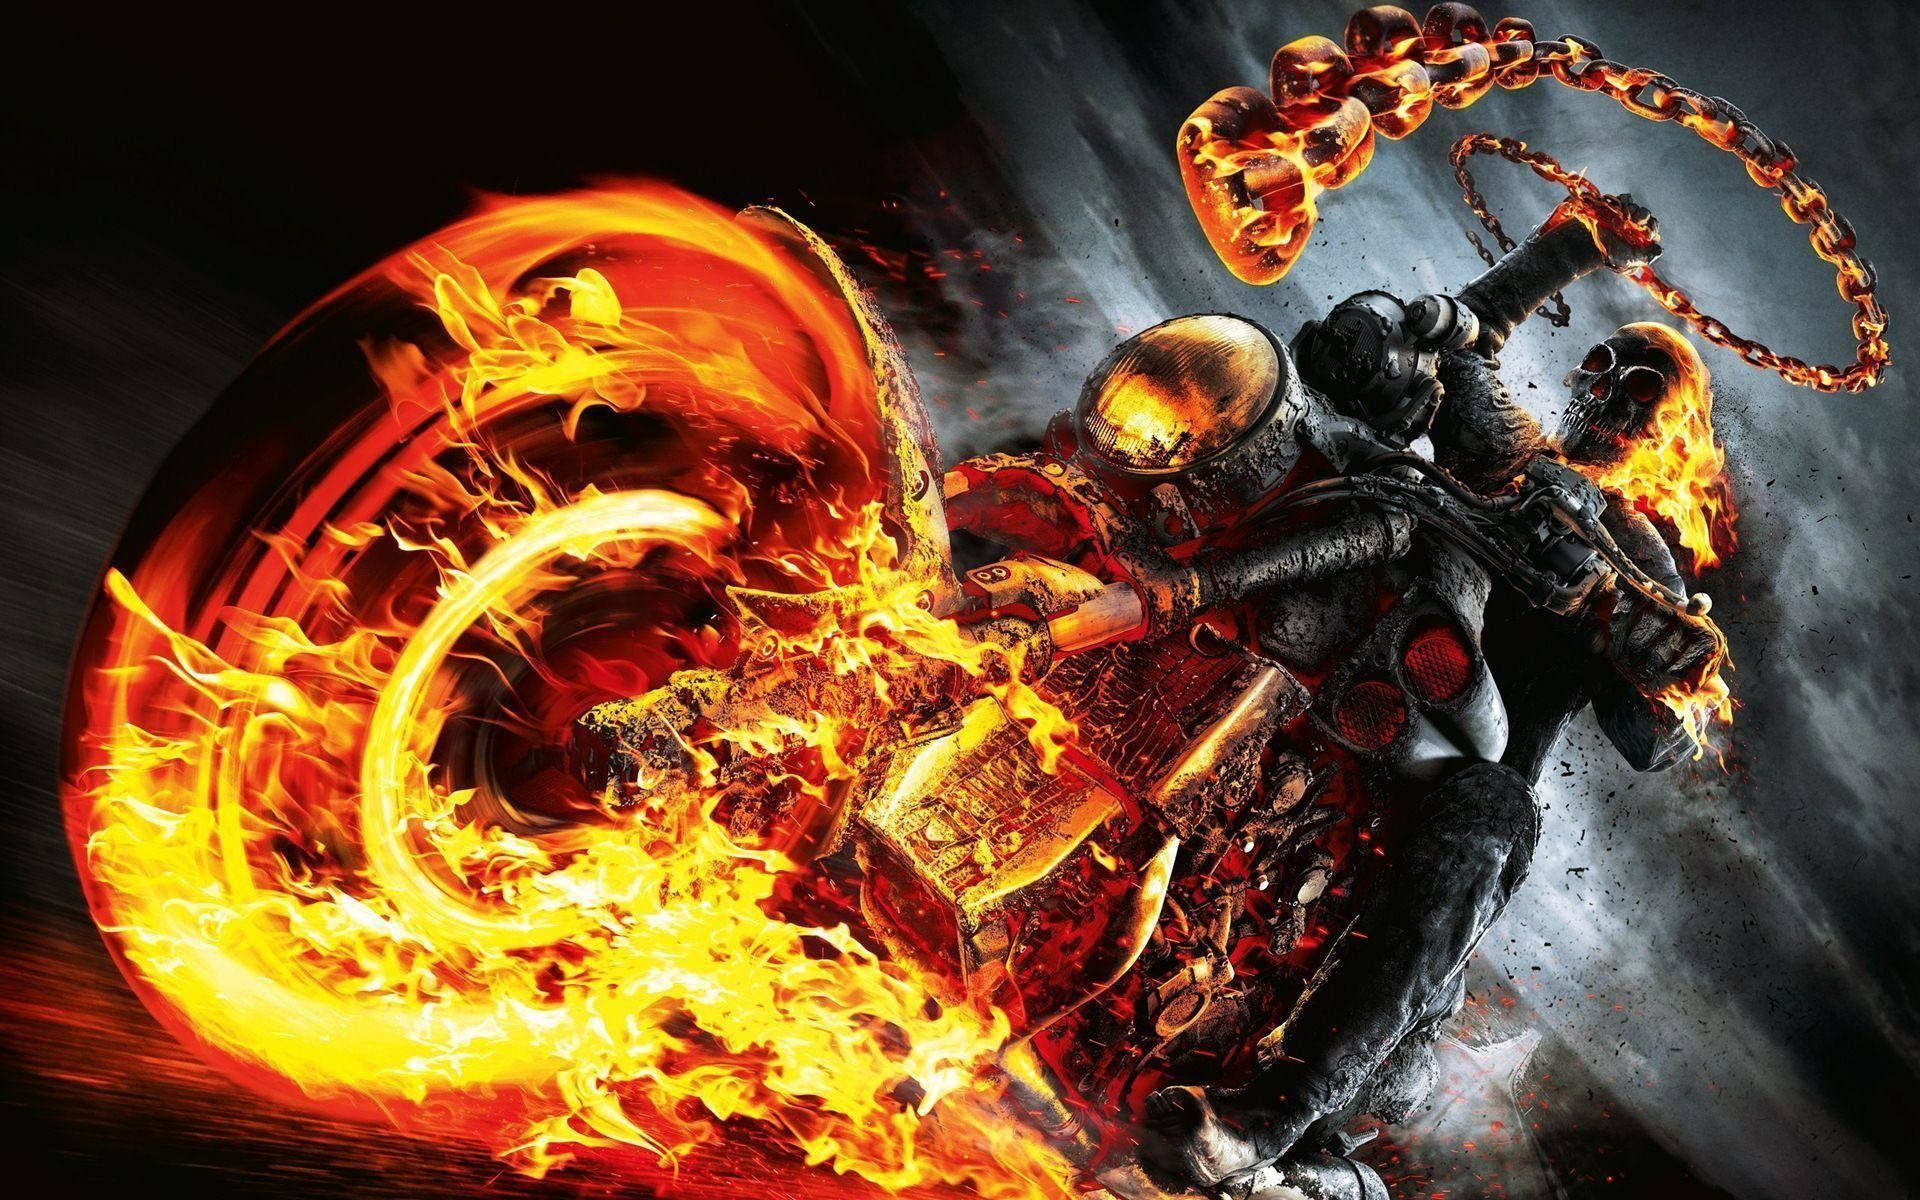 Cool 3d Ghost Rider With Burning Chain Background